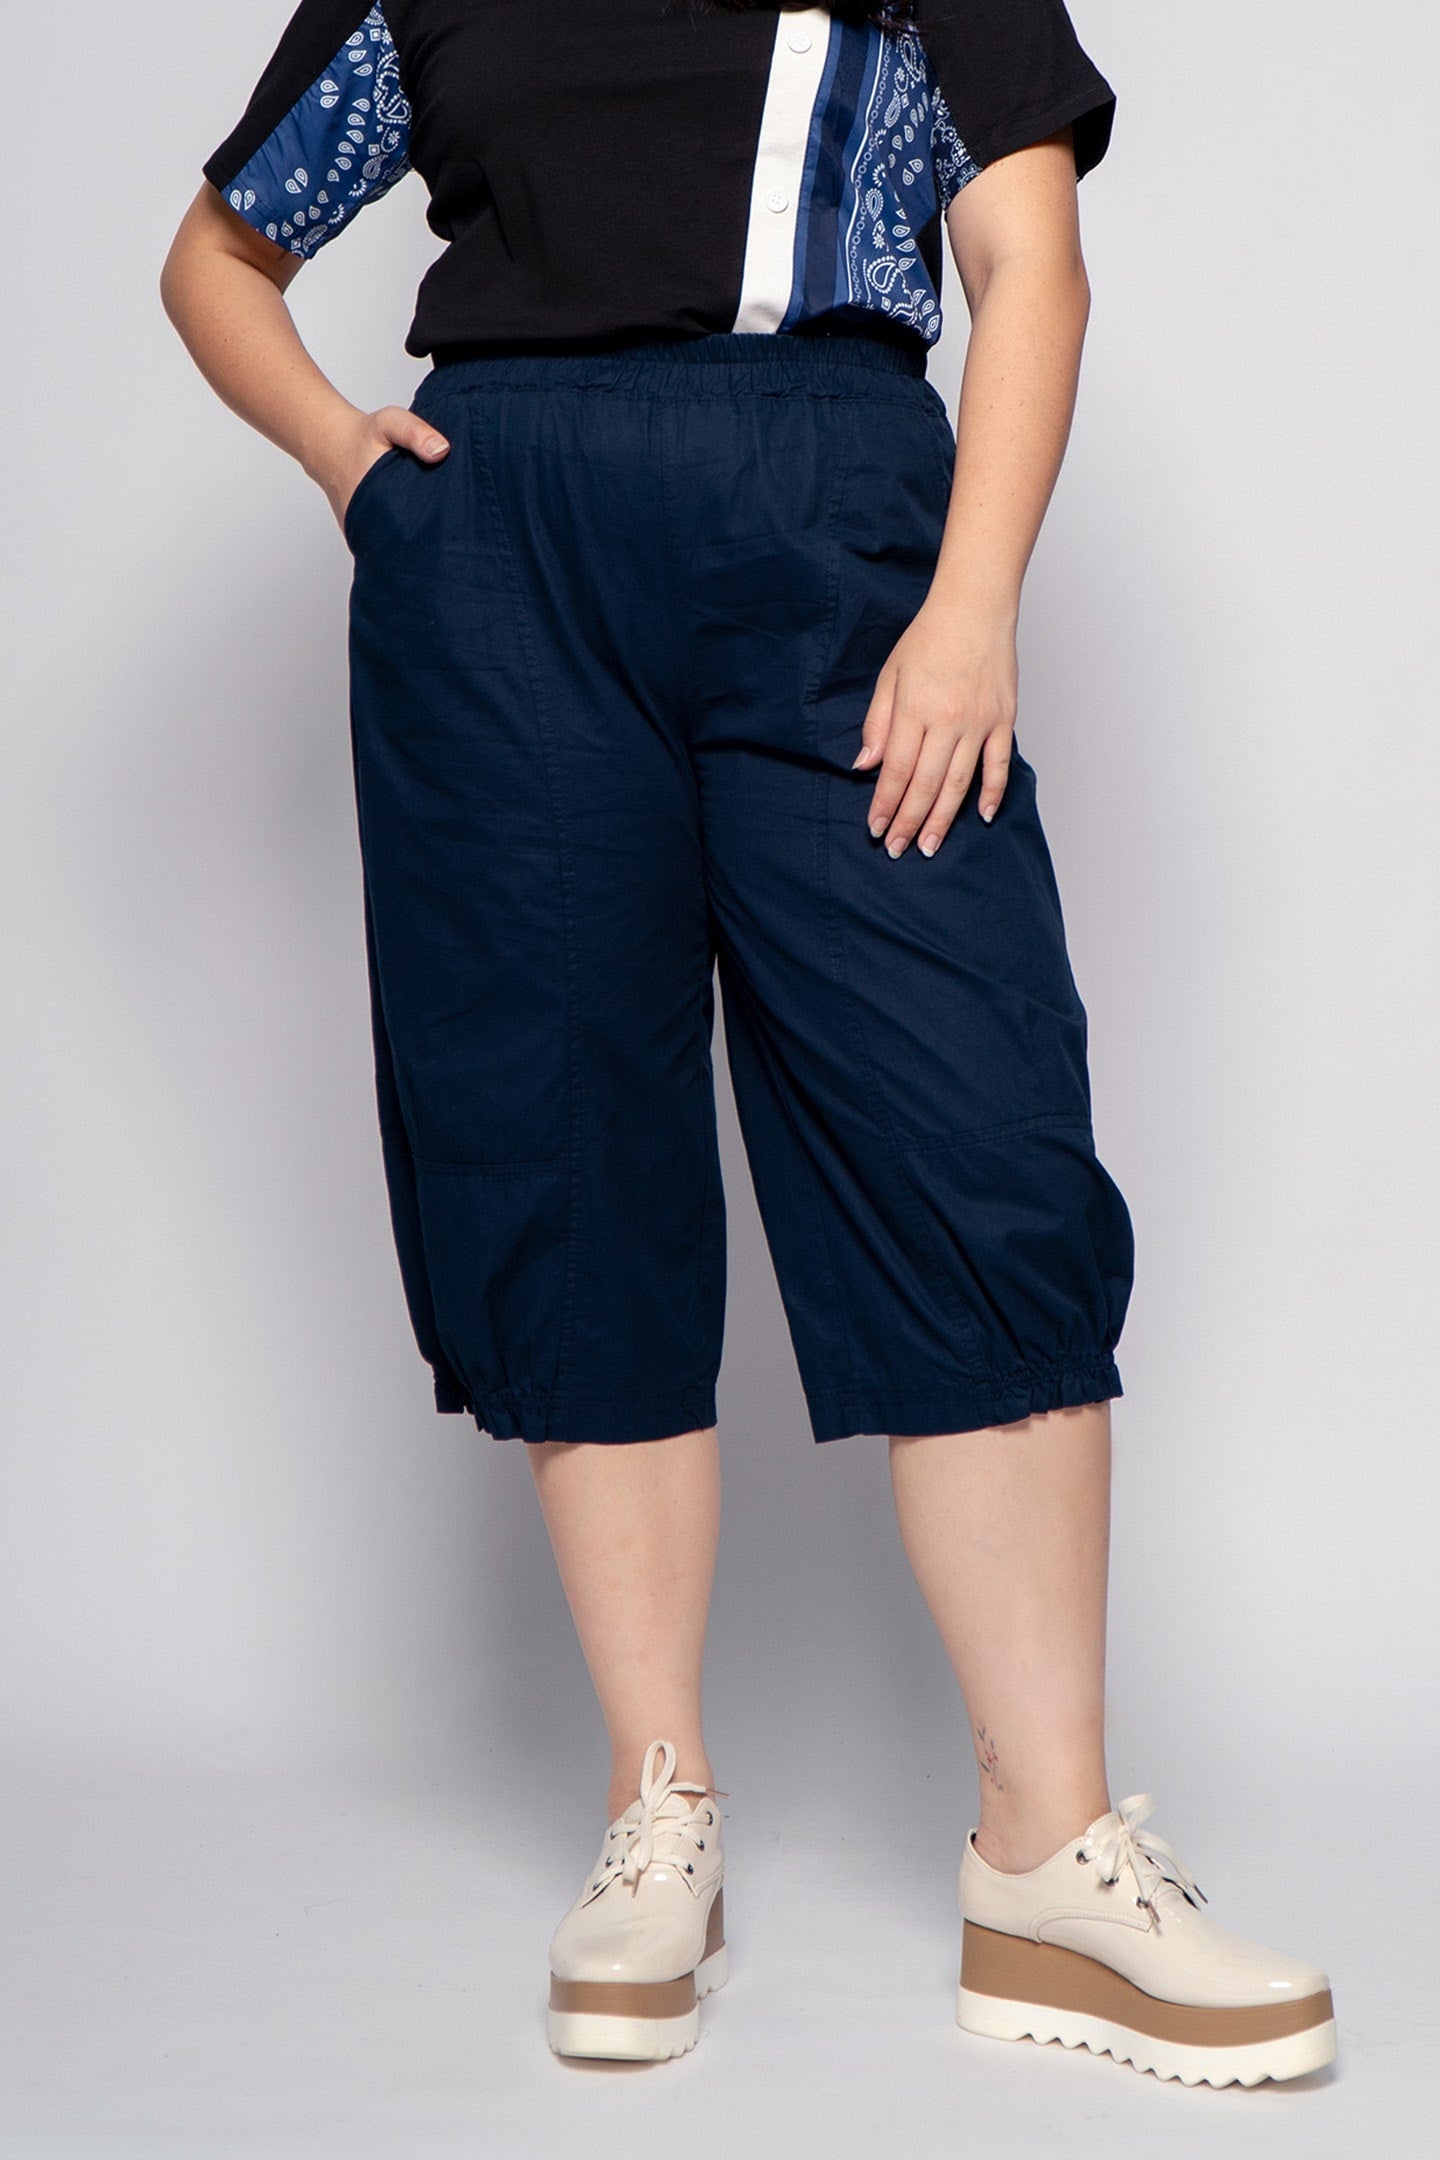 Backorders Iris Culottes in Navy Blue